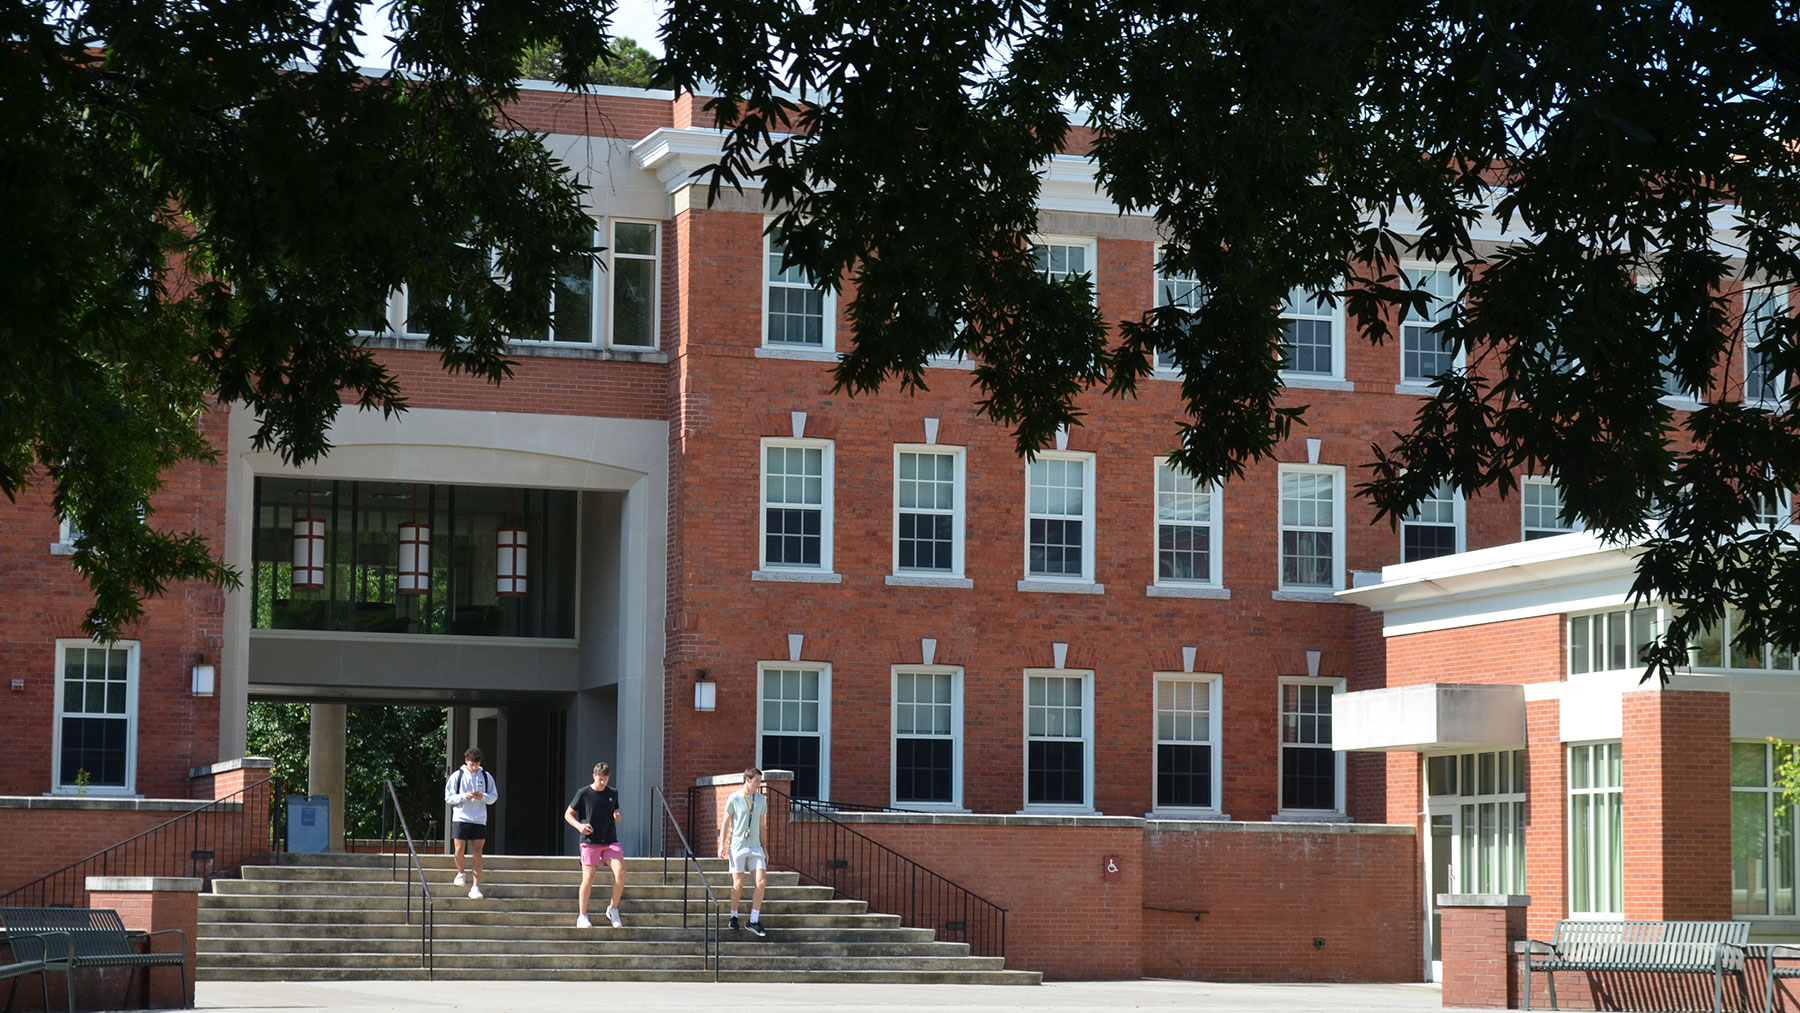 Students entering the UNCG Quad on campus.